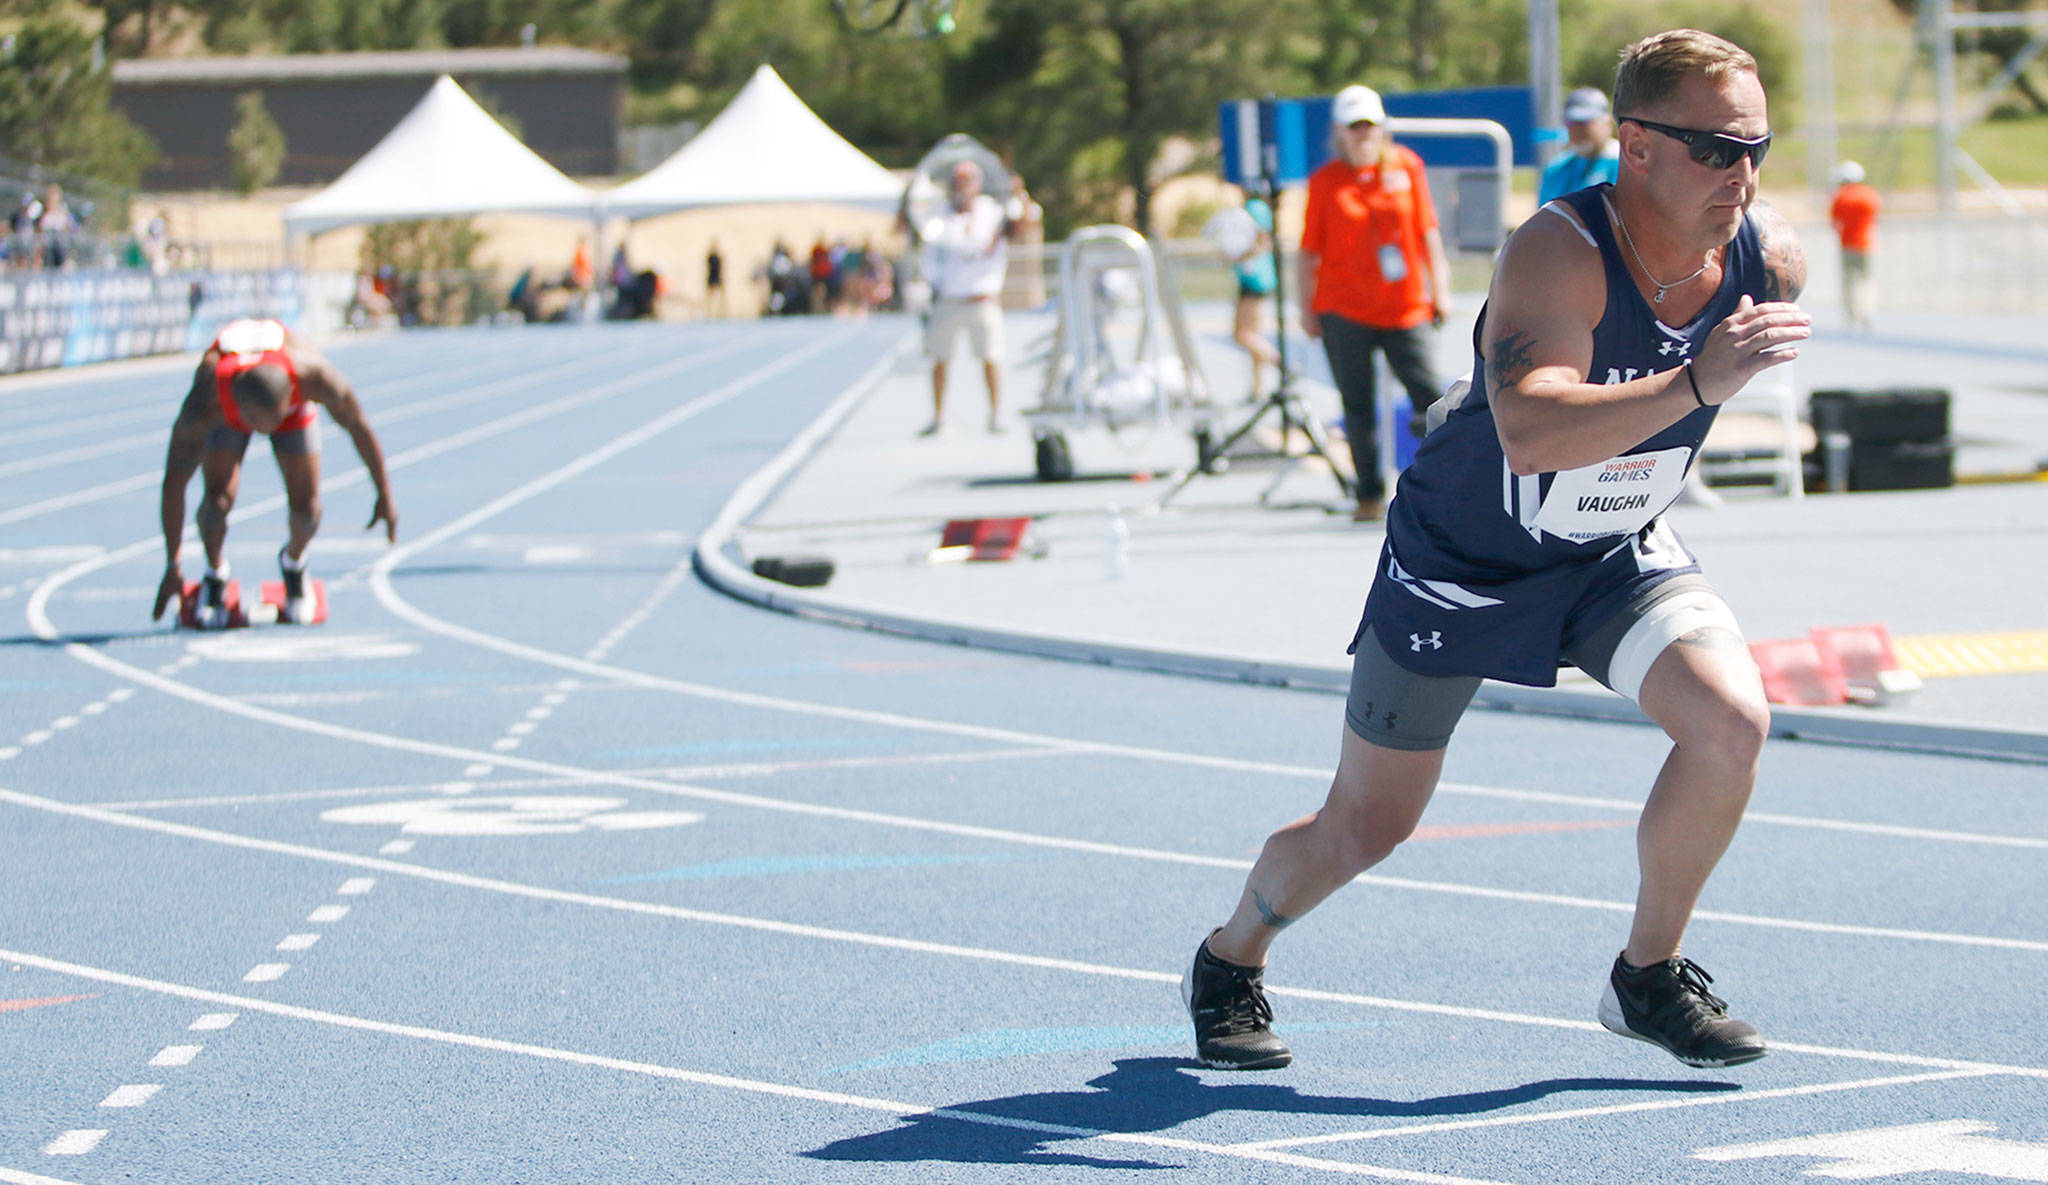 Chief Petty Officer Tim Vaughn, 36, member of Team Navy, of Marysville, competes in a race at the Warrior Games on June 2 at the Air Force Academy near Colorado Springs, Colorado. Vaughn was slashed and stabbed in the throat by a barber in Imperial Beach, California, in 2014. This week, he is competing in the Department of Defense Warrior Games for the first time. He is using the games as an opportunity to recover from the effects of PTSD. (Photo/Miranda Daniel, Grady Sports Bureau)